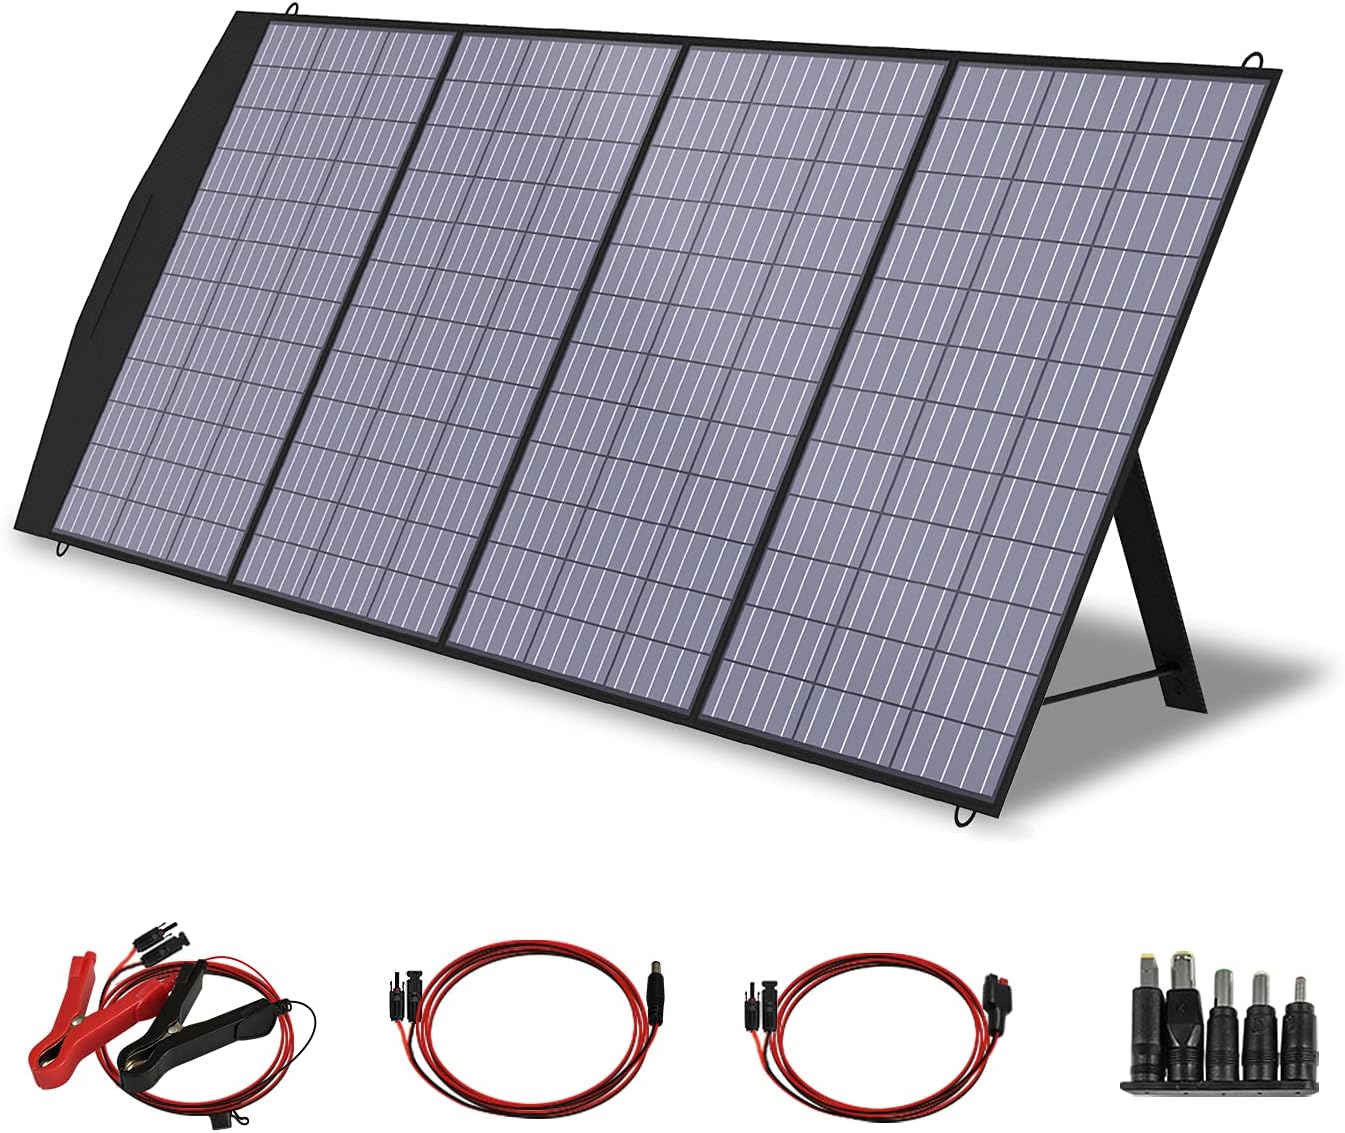 ALLPOWERS SP033 200W Portable Solar Panel Kit Review